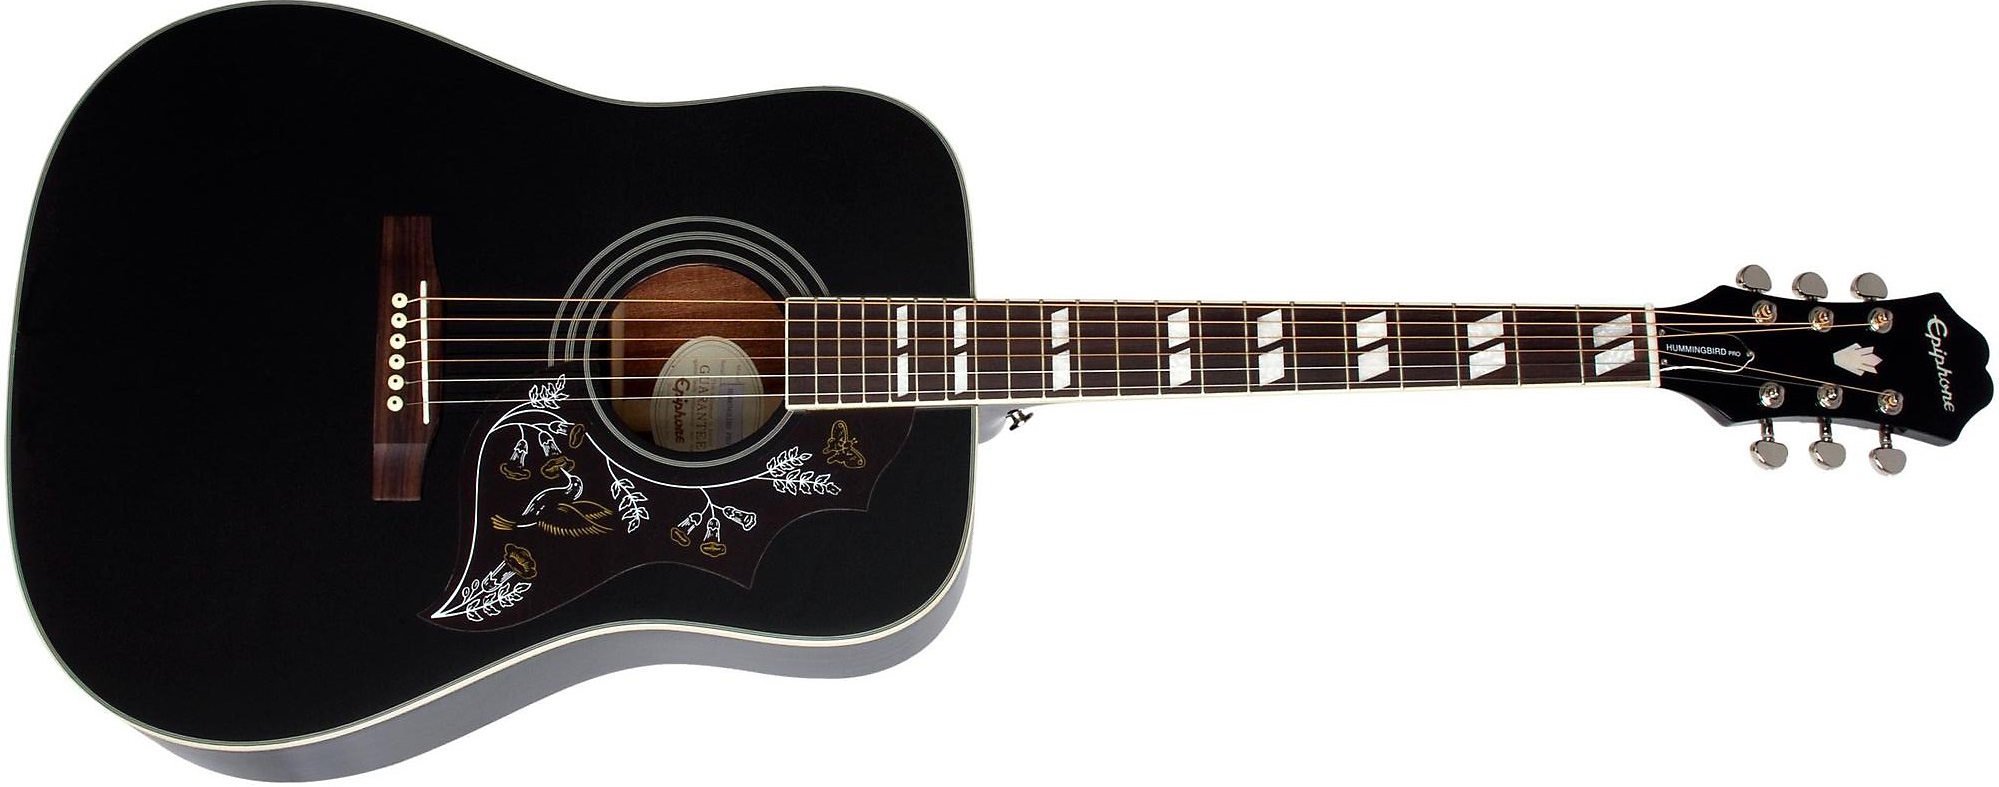 Epiphone Hummingbird Studio Acoustic-Electric Guitar on a white background